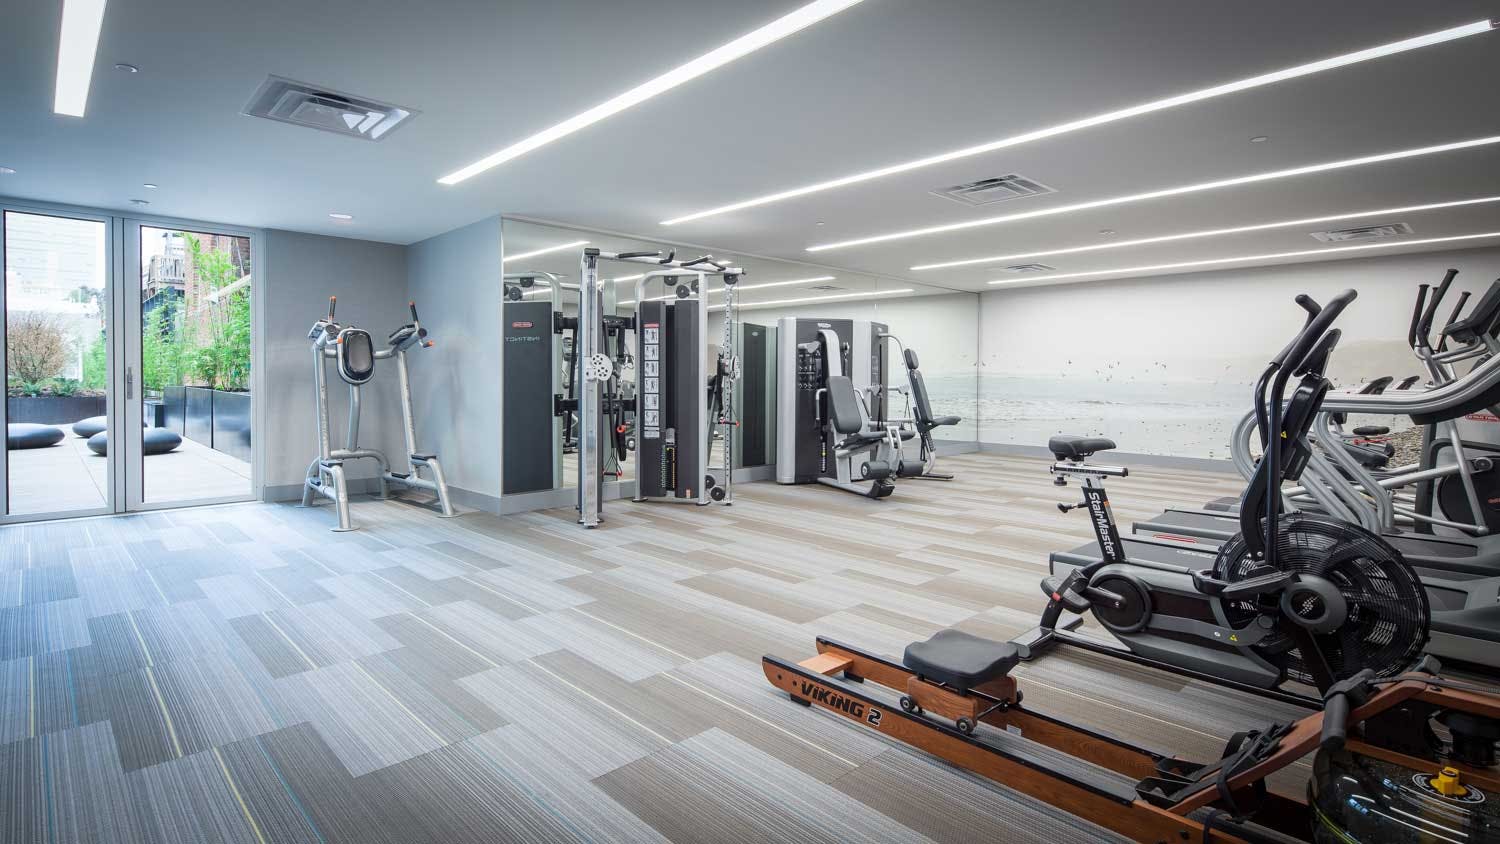 One of the many amenities offered at 99 Rausch is a fully-equipped gym room with weight machines and running equipment. 